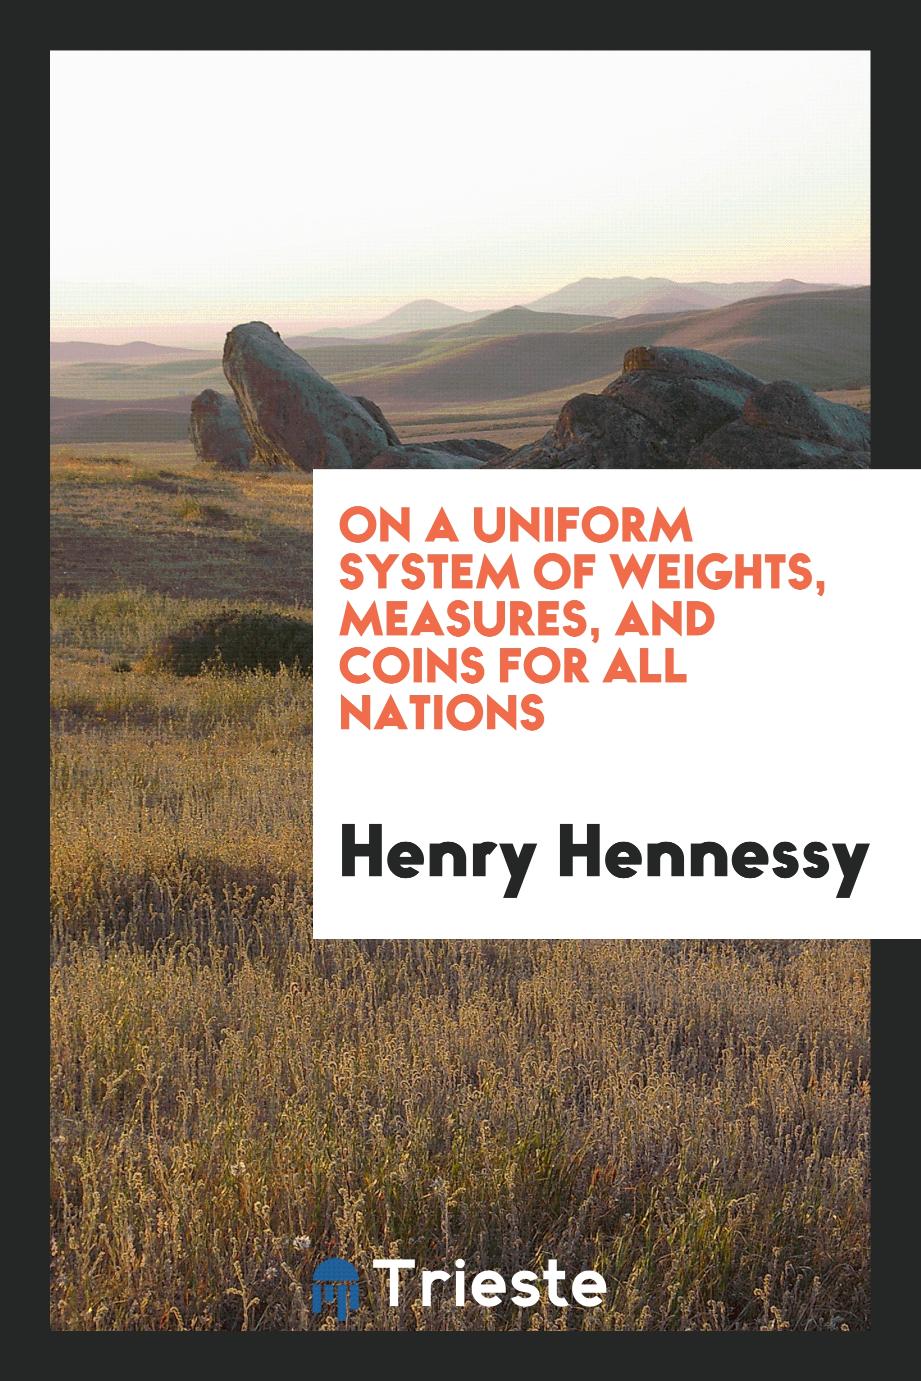 On a uniform system of weights, measures, and coins for all nations